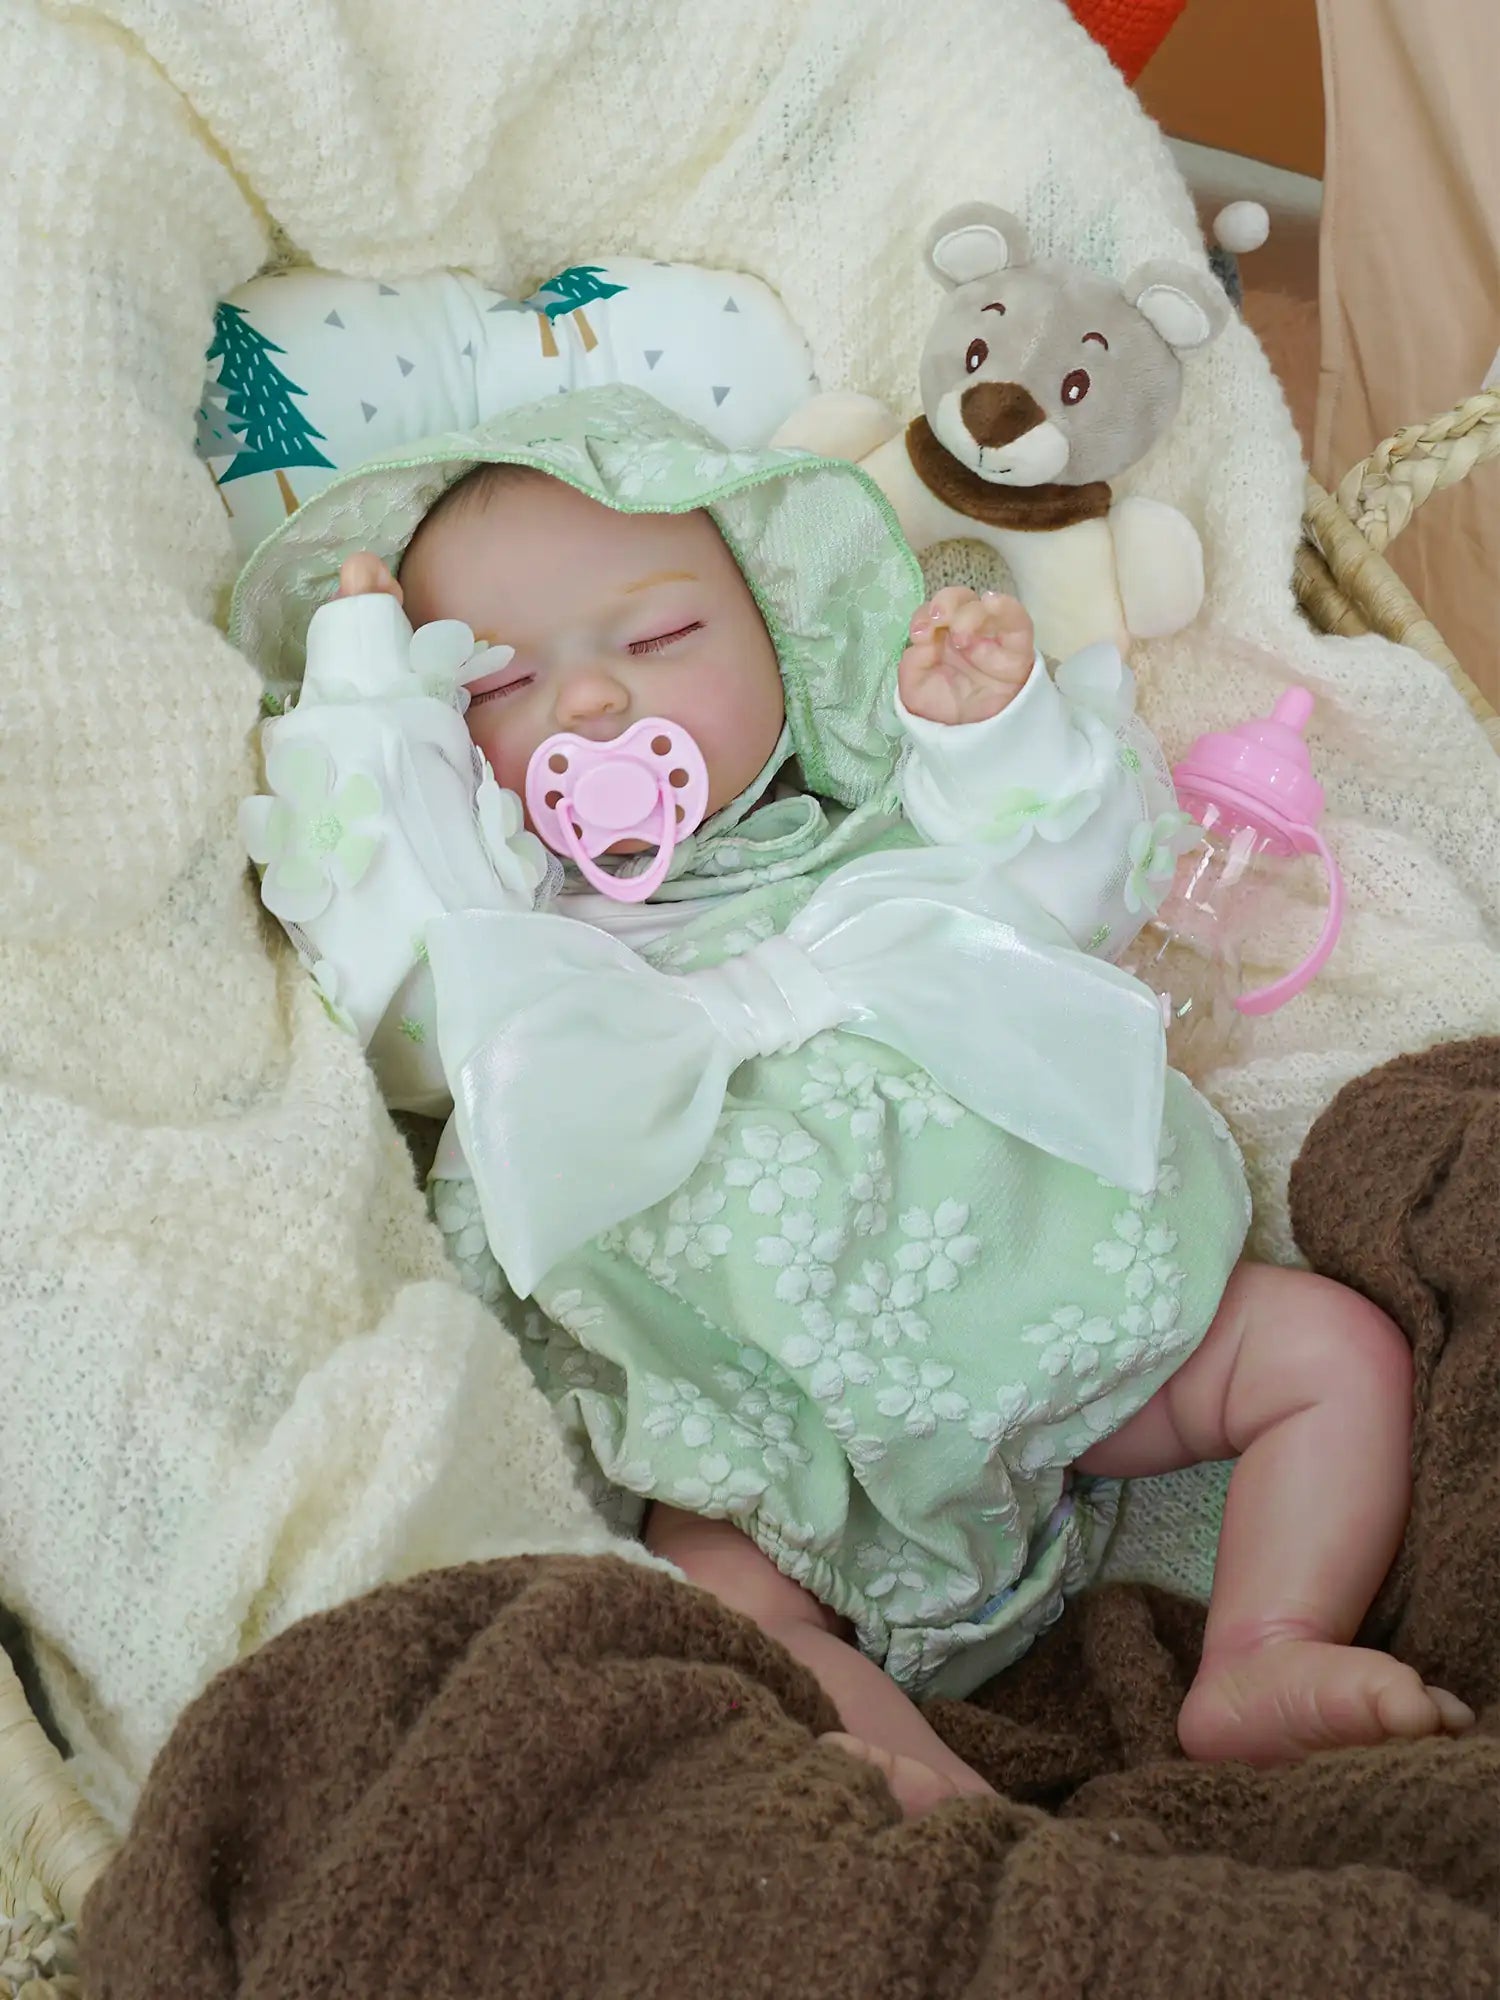 Reborn baby doll in a pale green floral outfit with a matching hood, sleeping comfortably in a wicker basket. The doll is surrounded by soft white and brown blankets, with a teddy bear and a pink bottle positioned nearby.